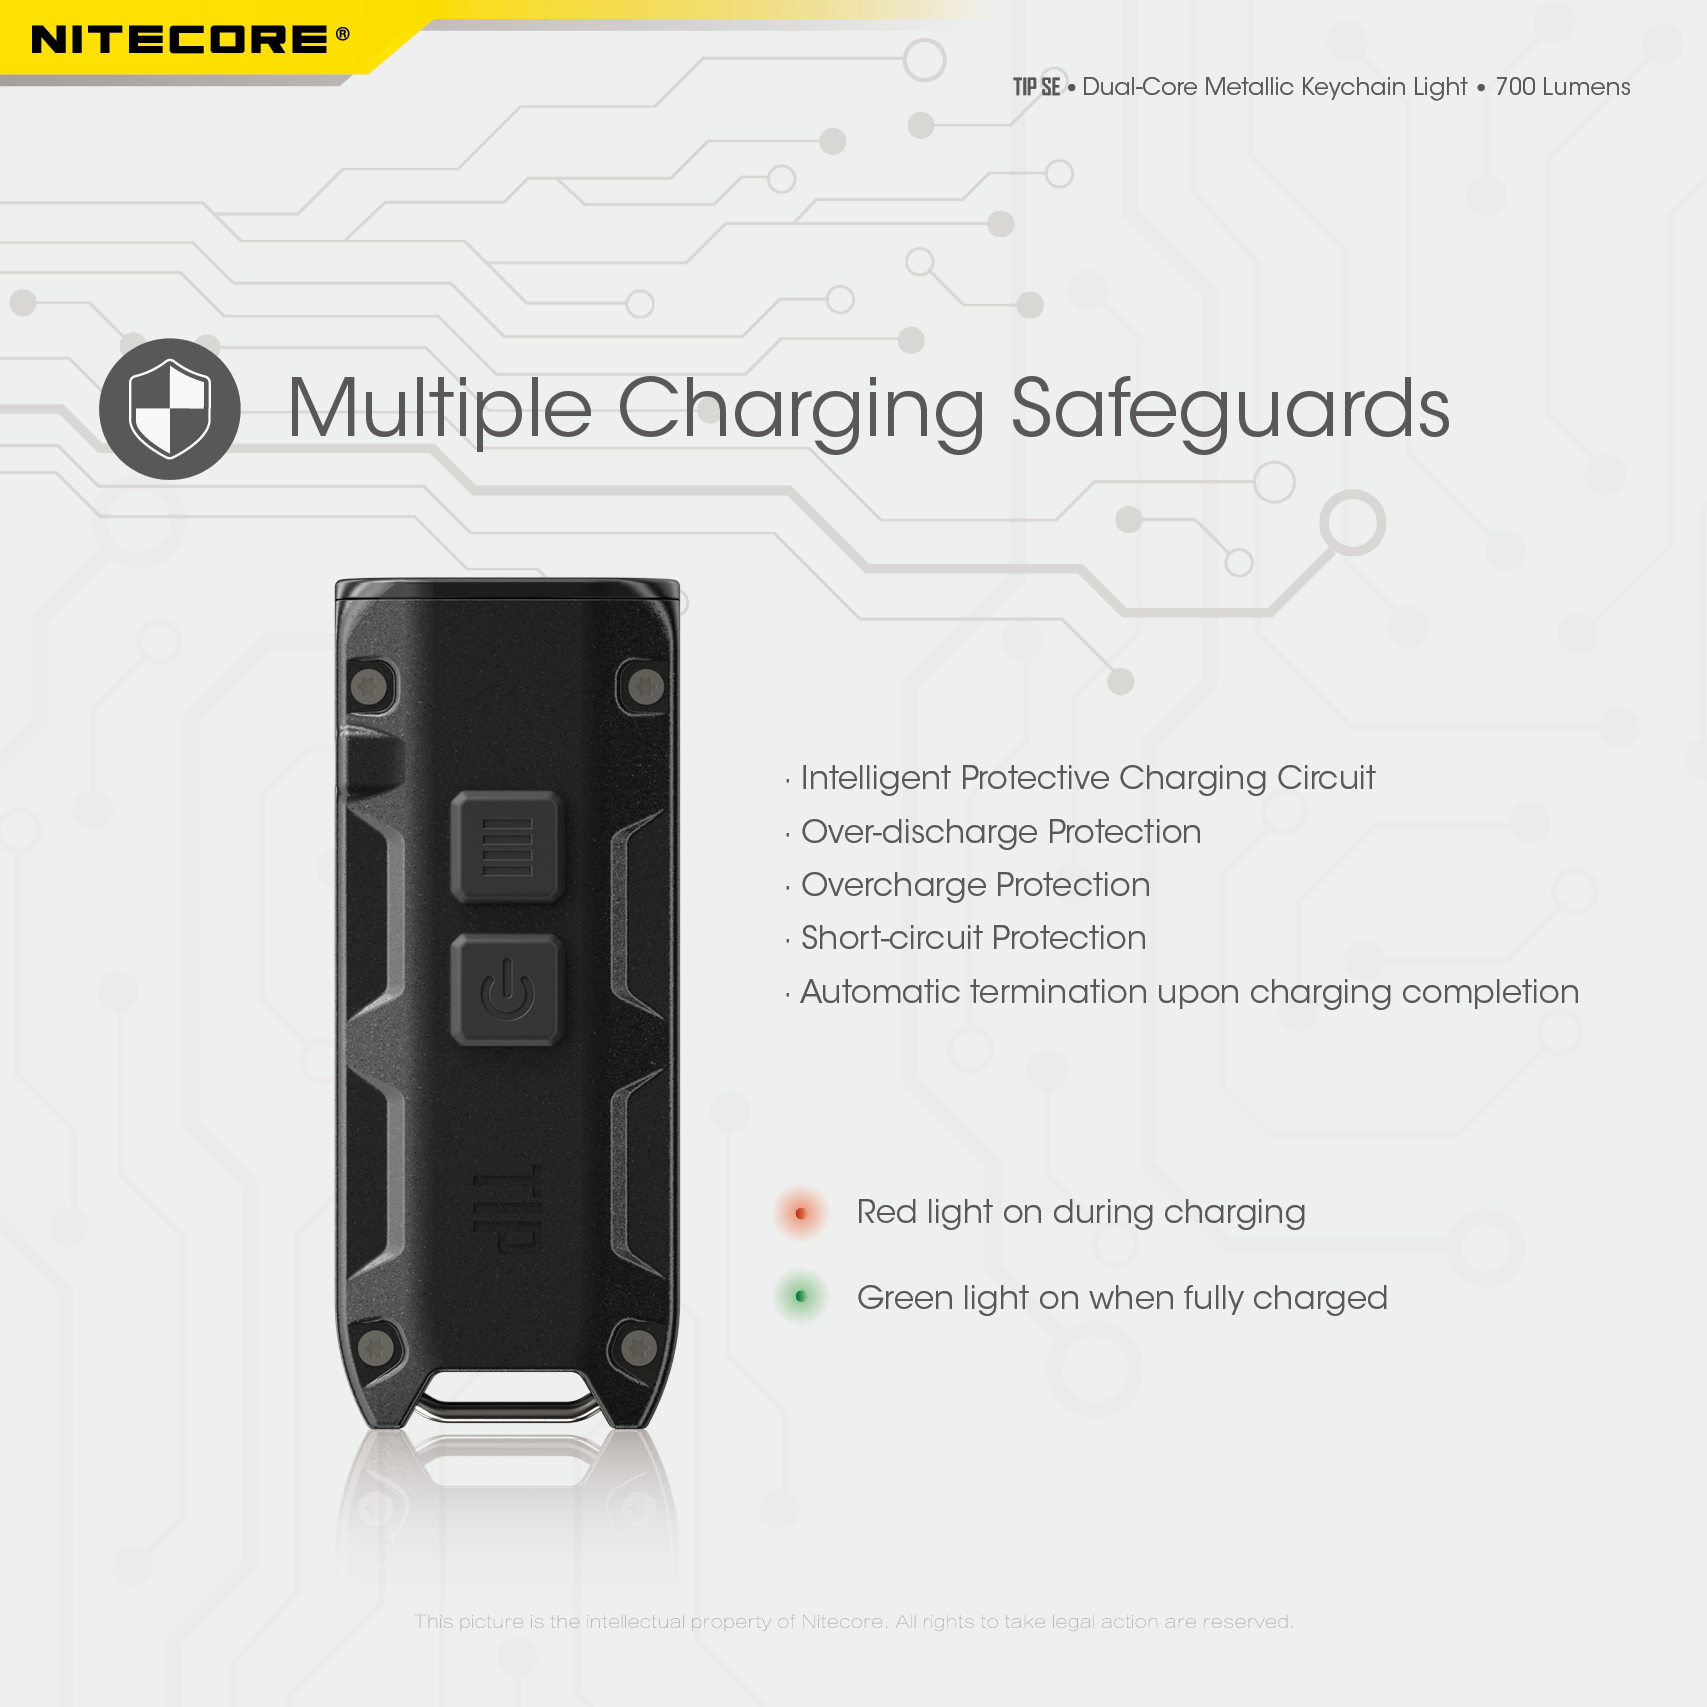 NITECORE-TIP-SE-700LM-P8-Dual-Light-LED-Keychain-Flashlight-Type-C-Rechargeable-QC-Every-Day-Carry-M-1976045-7